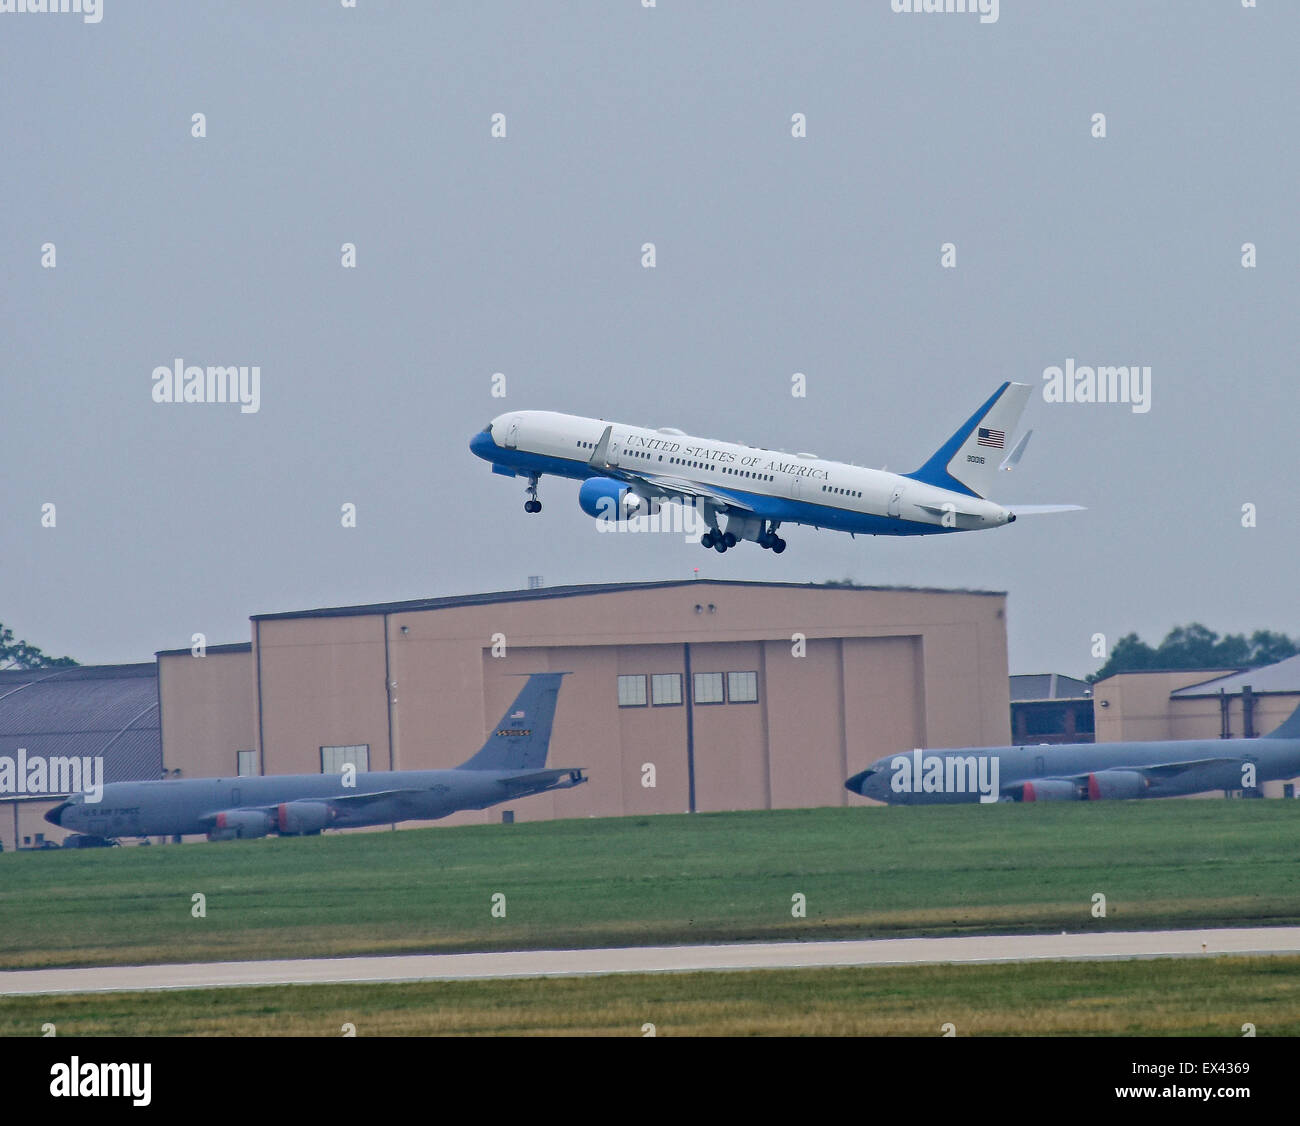 Air Force One, with United States President Barack Obama aboard, takes-off from Joint Base Andrews, in Maryland on Thursday, July 2, 2015. The designation "Air Force 1" is extended to any airplane transporting the President of the U.S. For the President's trip to LaCrosse, Wisconsin, the smaller C-32, which is a specially configured Boeing 757-200, was used, instead of the familiar VC-25, probably due to the smaller airport. In addition to its occasional use for Presidential travel, the C-32 regularly transports the Vice President, the first lady, members of the Cabinet and members of Congress Stock Photo